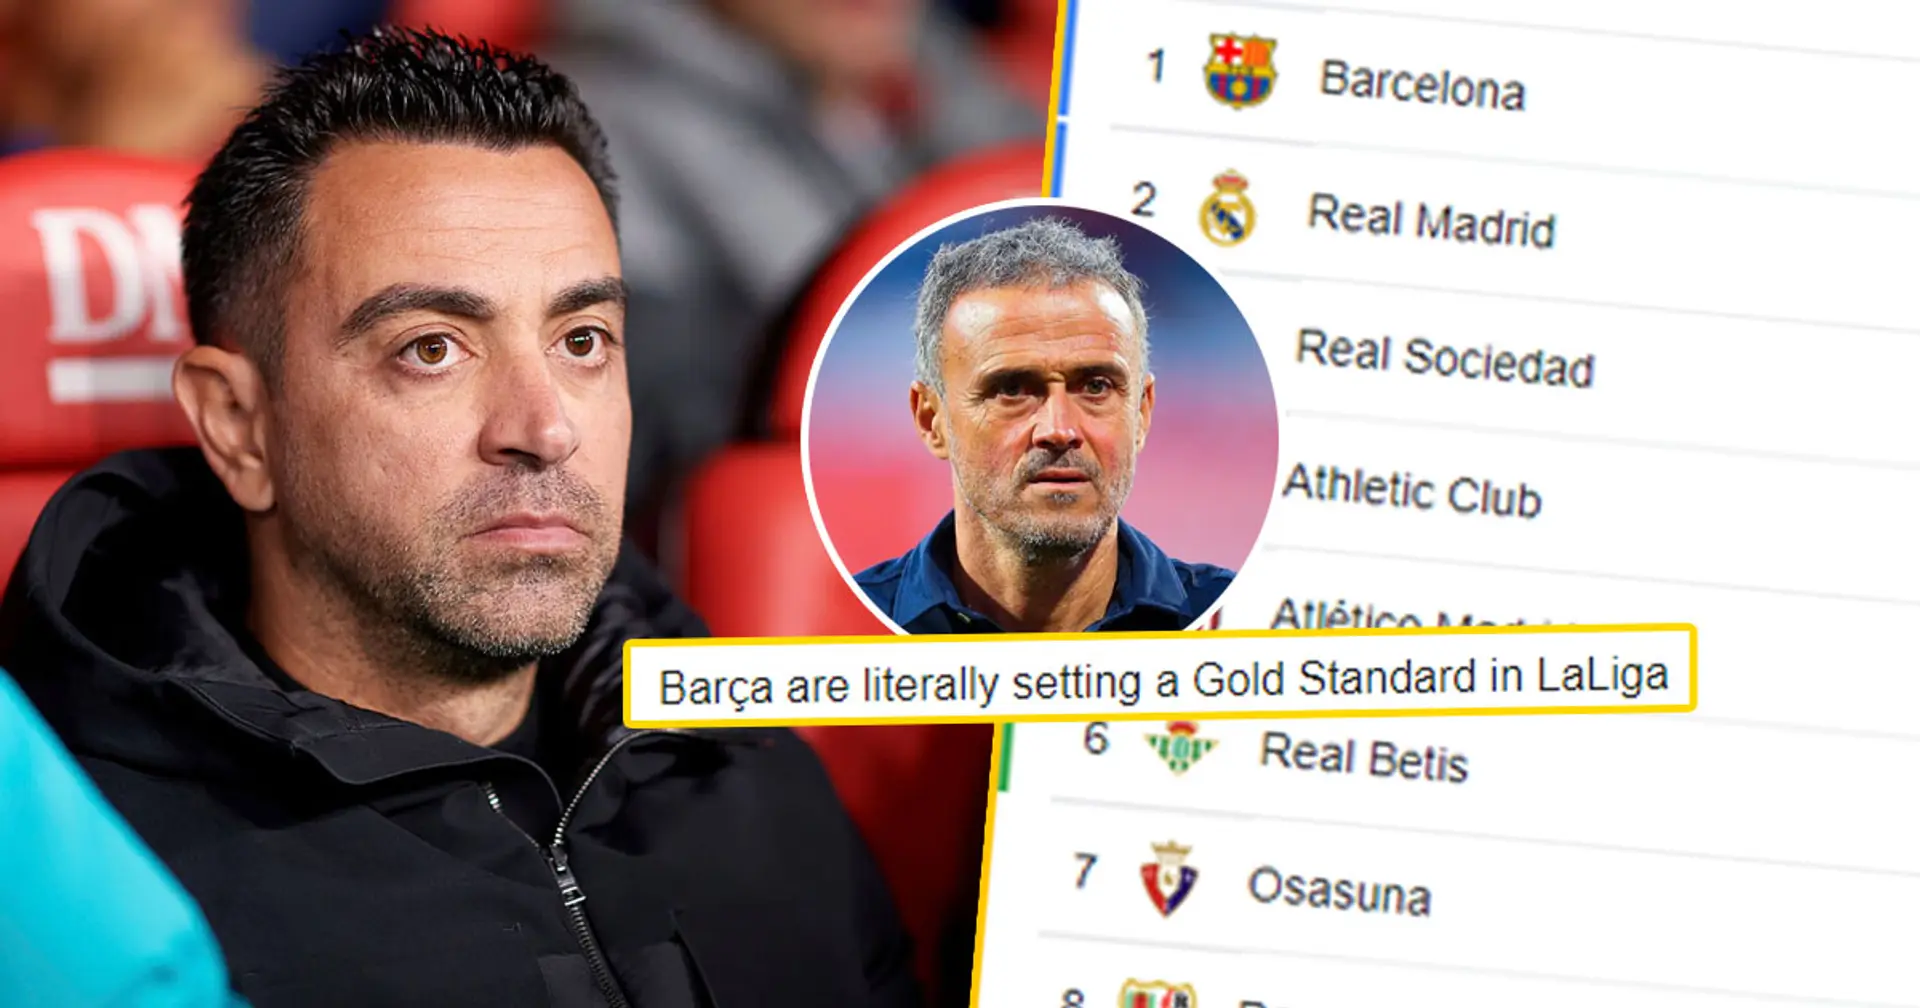 'A bunch of ungrateful clowns': cule angry at fans attacking Xavi after Spain masterclass